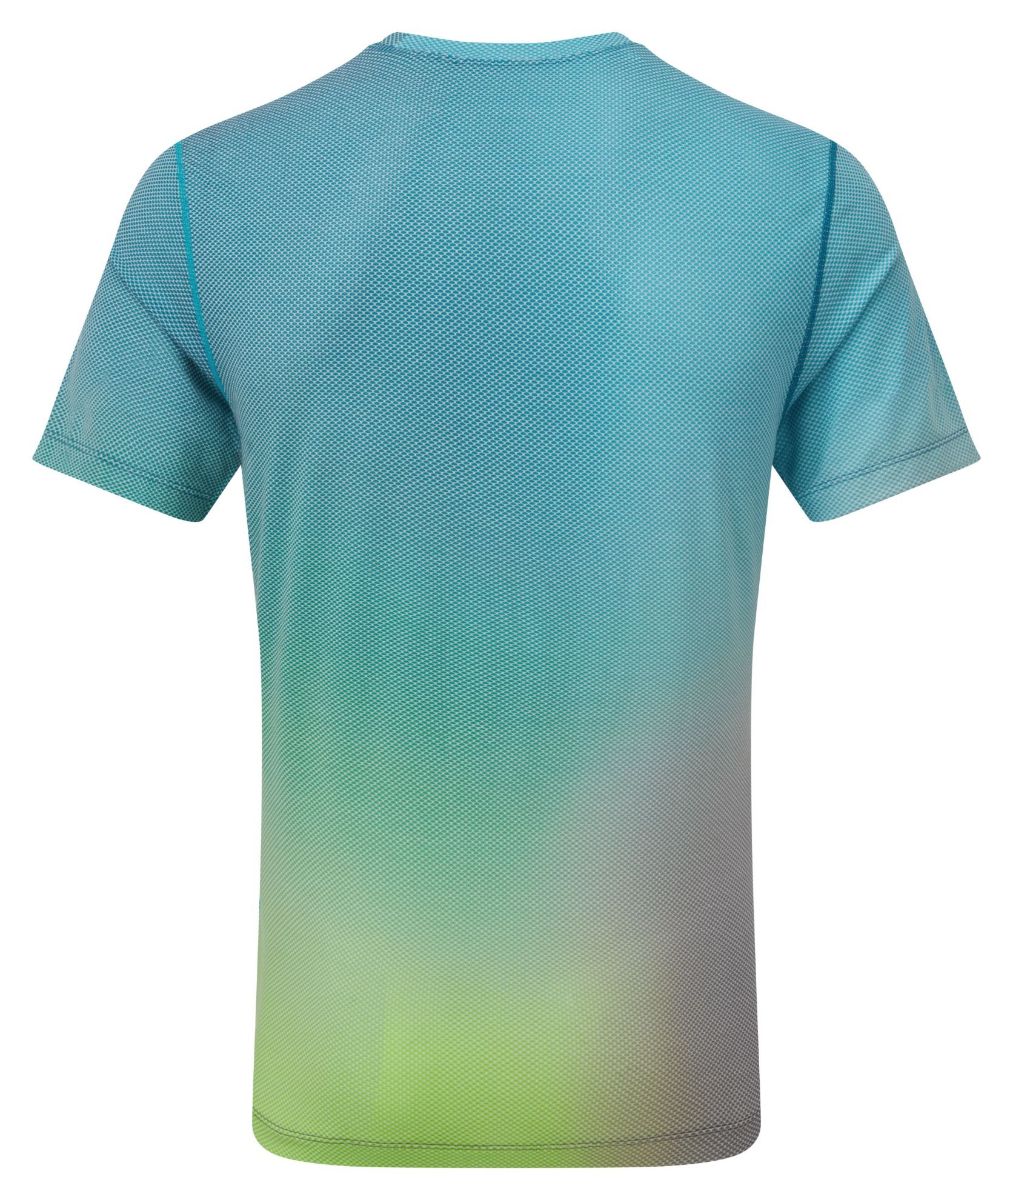 ron-hill-golden-hour-tee-cyanacid-lime-merge